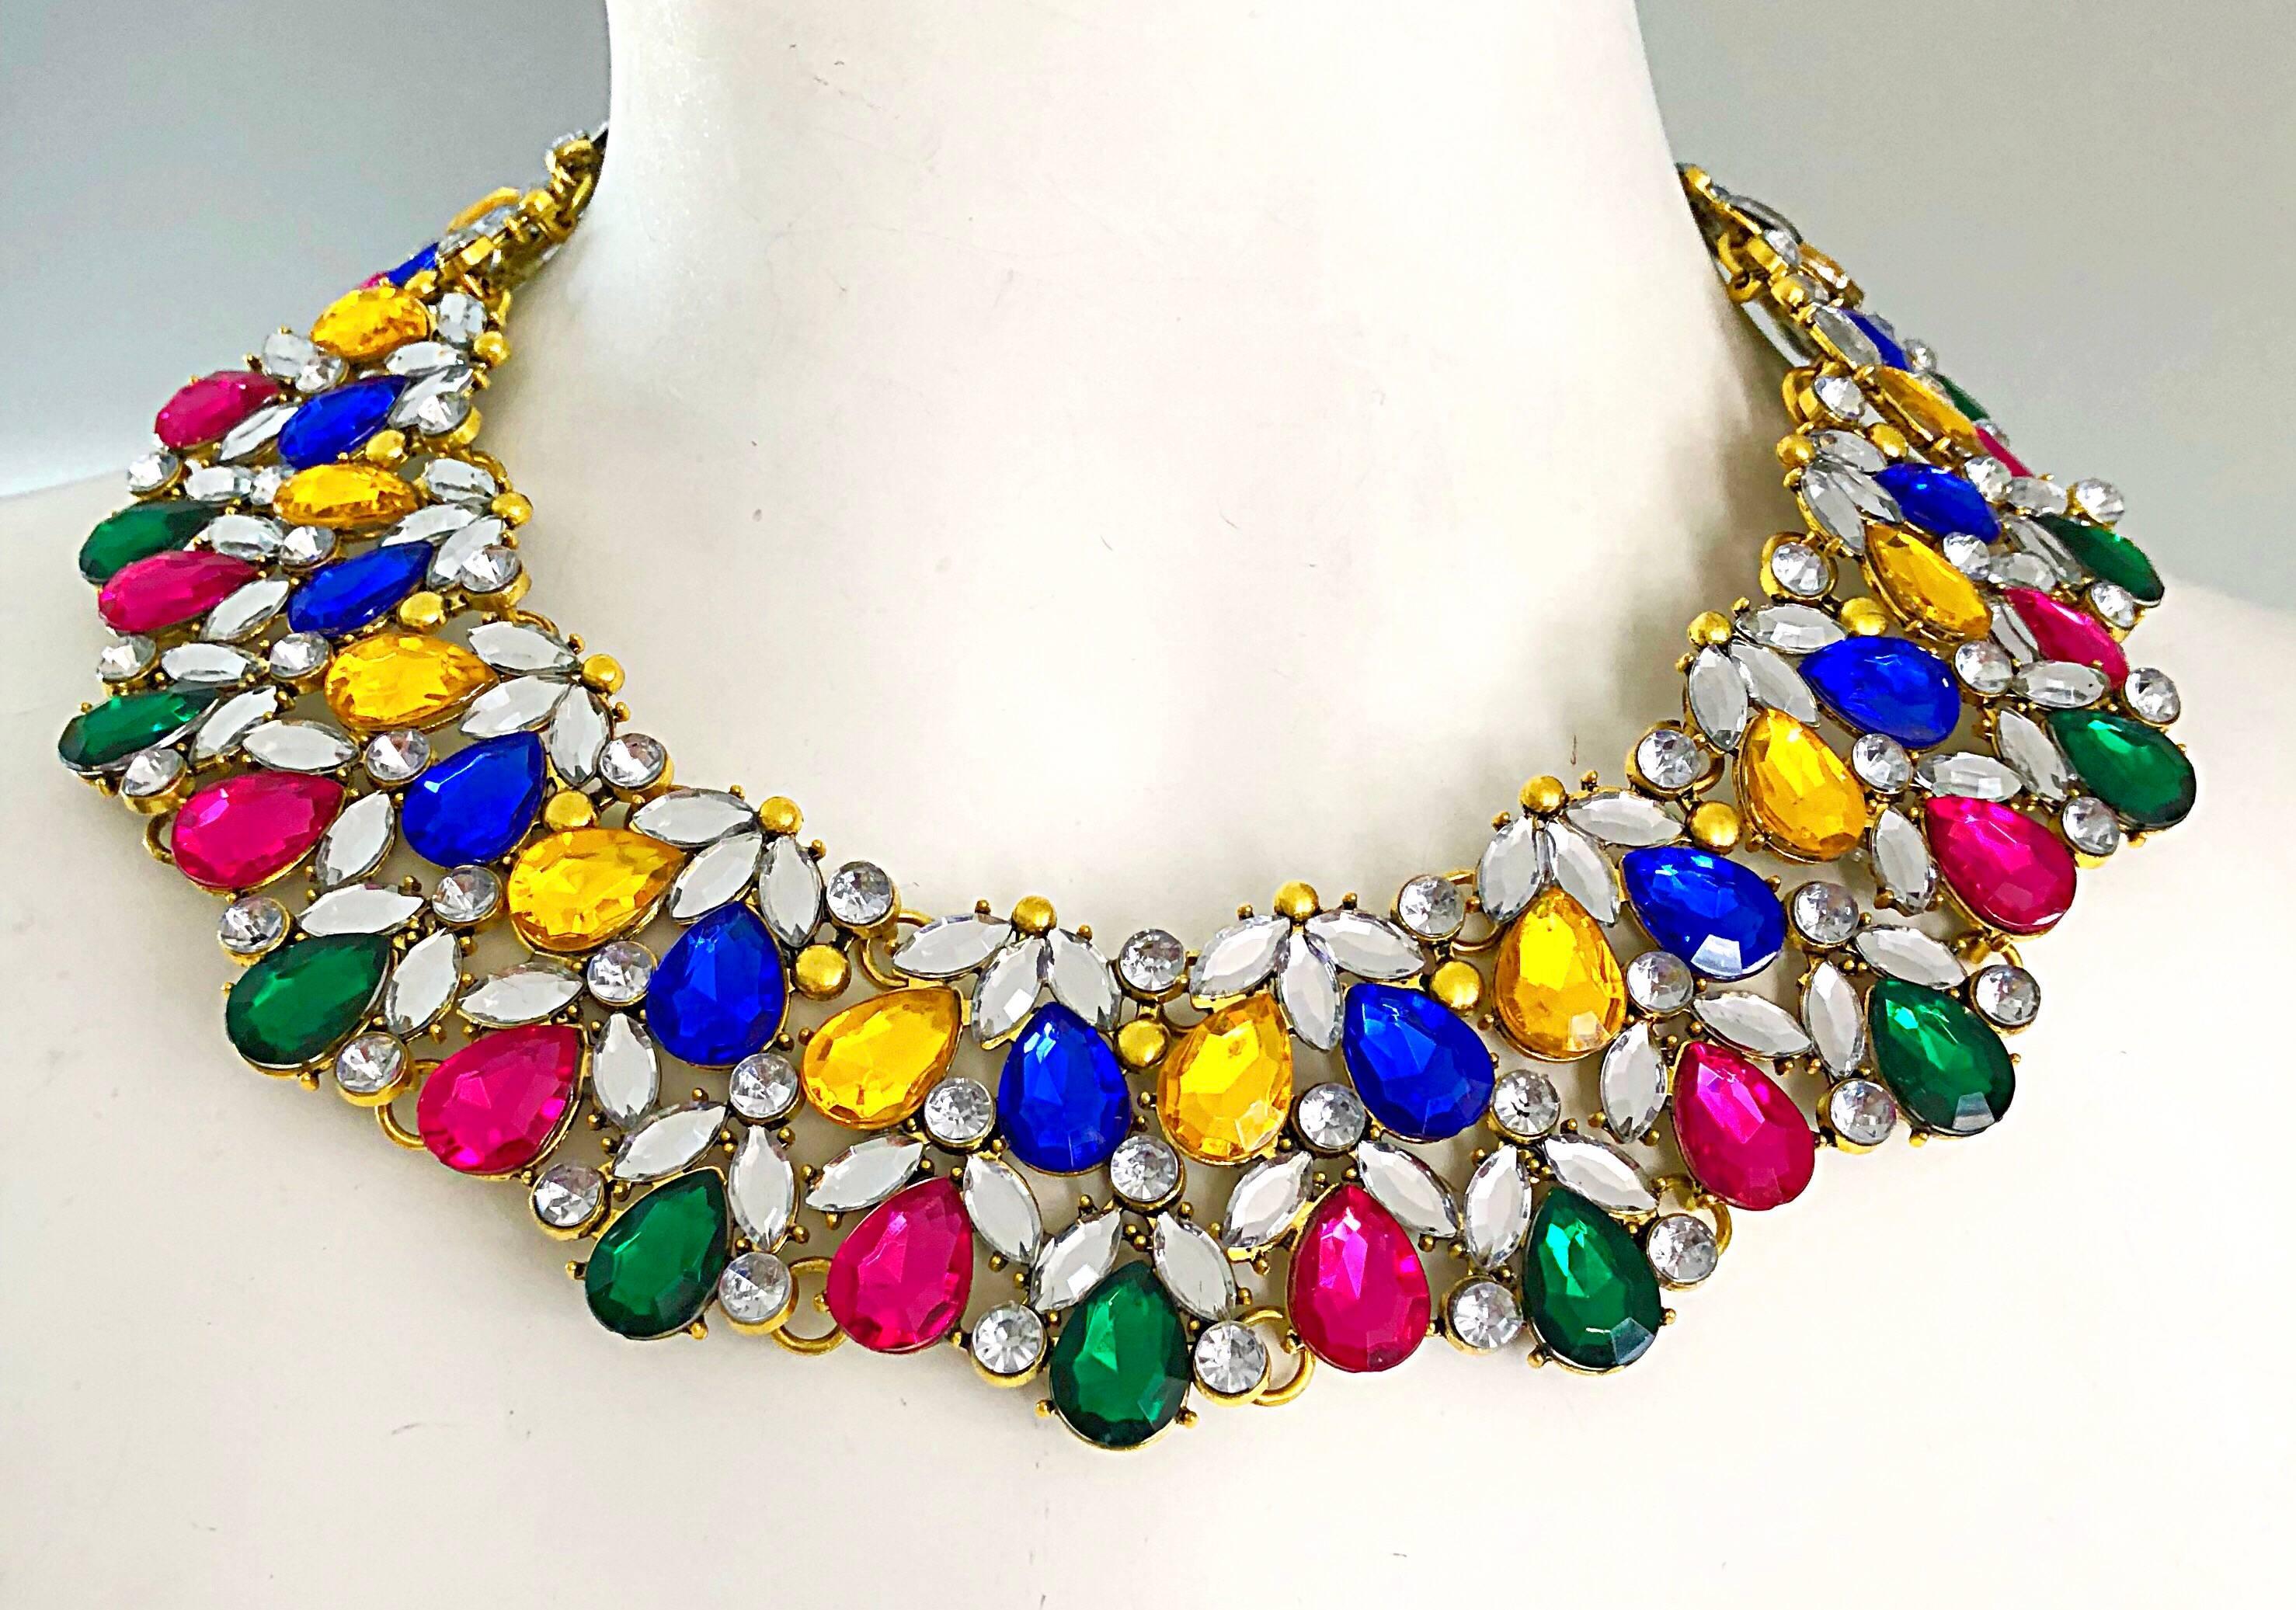 Stunning 60s vintage KENNETH JAY LANE fruit salad / tutti fruity multi colored rhinestone couture necklace! Features vibrant hand-set sparkling rhinestones in hot pink, royal blue, kelly green, canary yellow, and clear. Fits perfectly around the